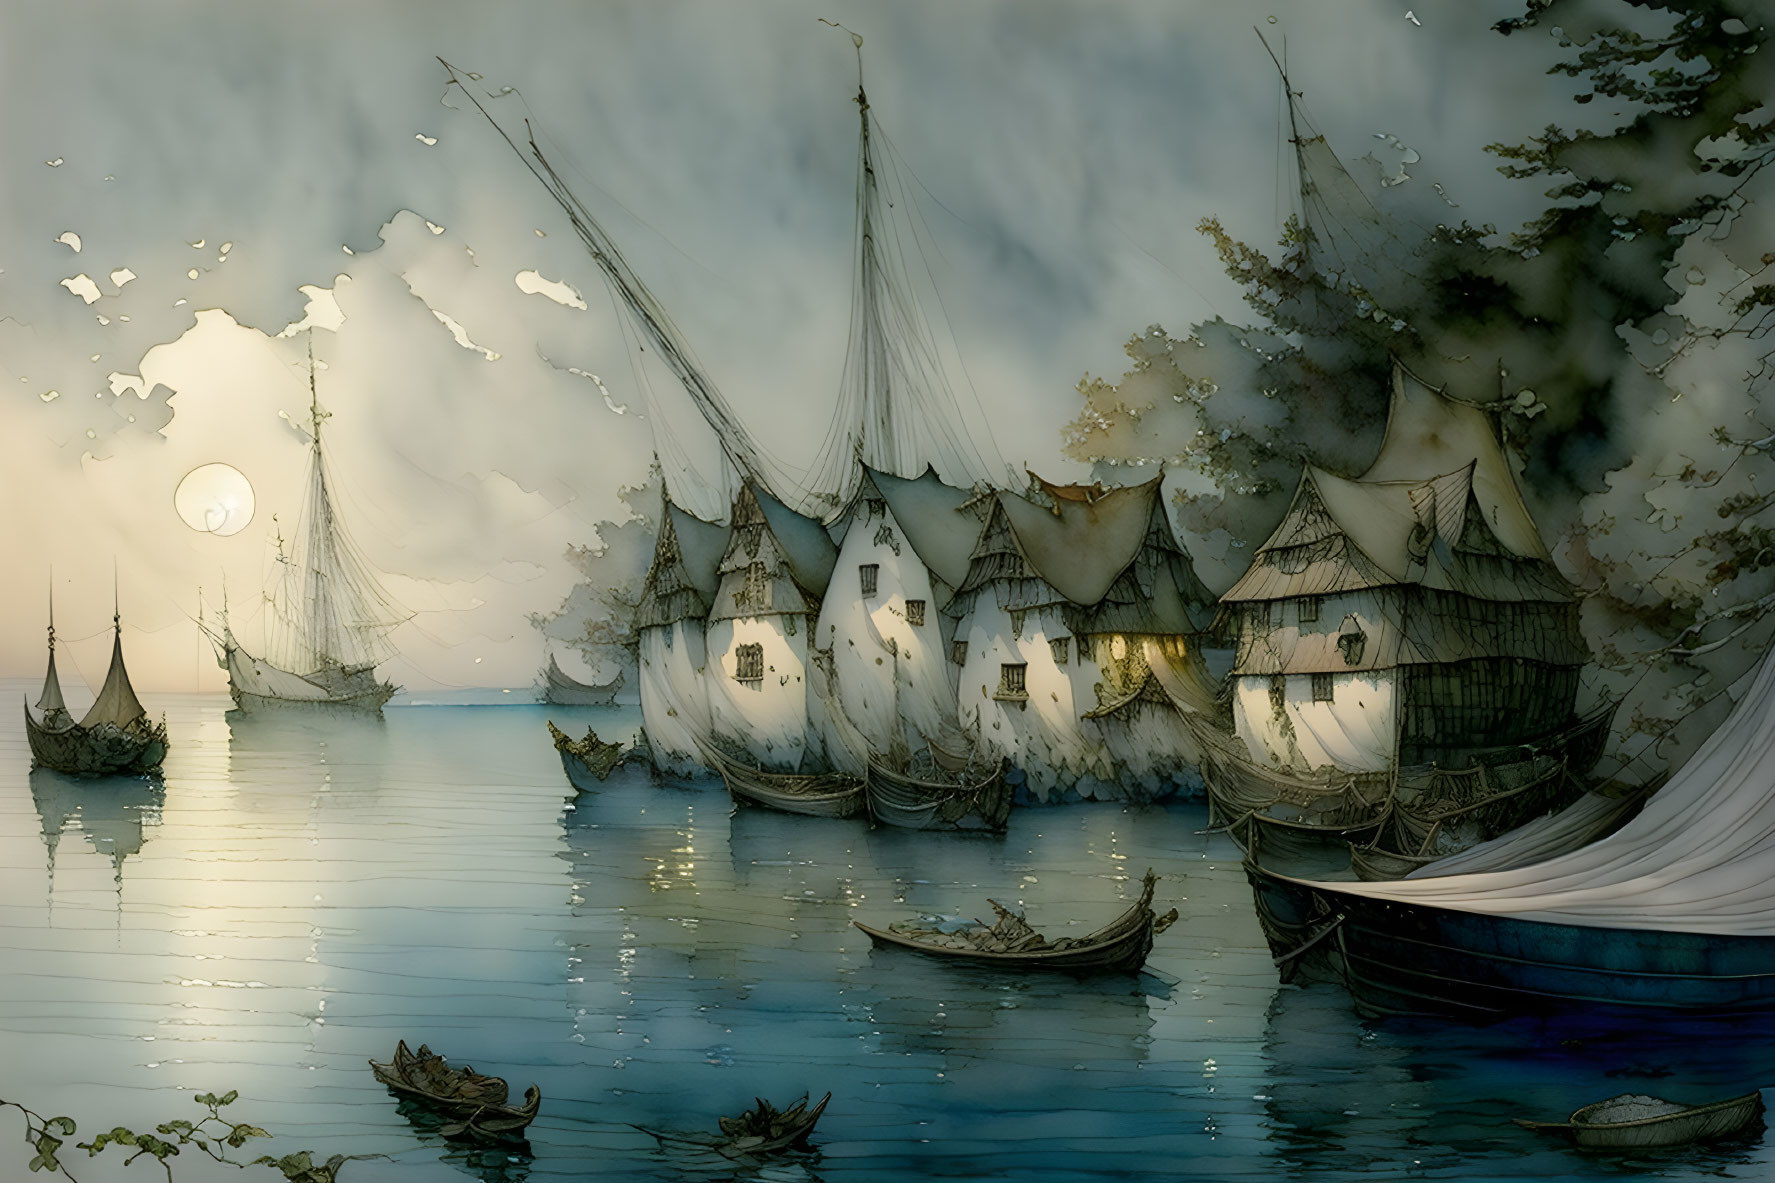 Surreal illustration: ships with house-like structures on calm waters at night